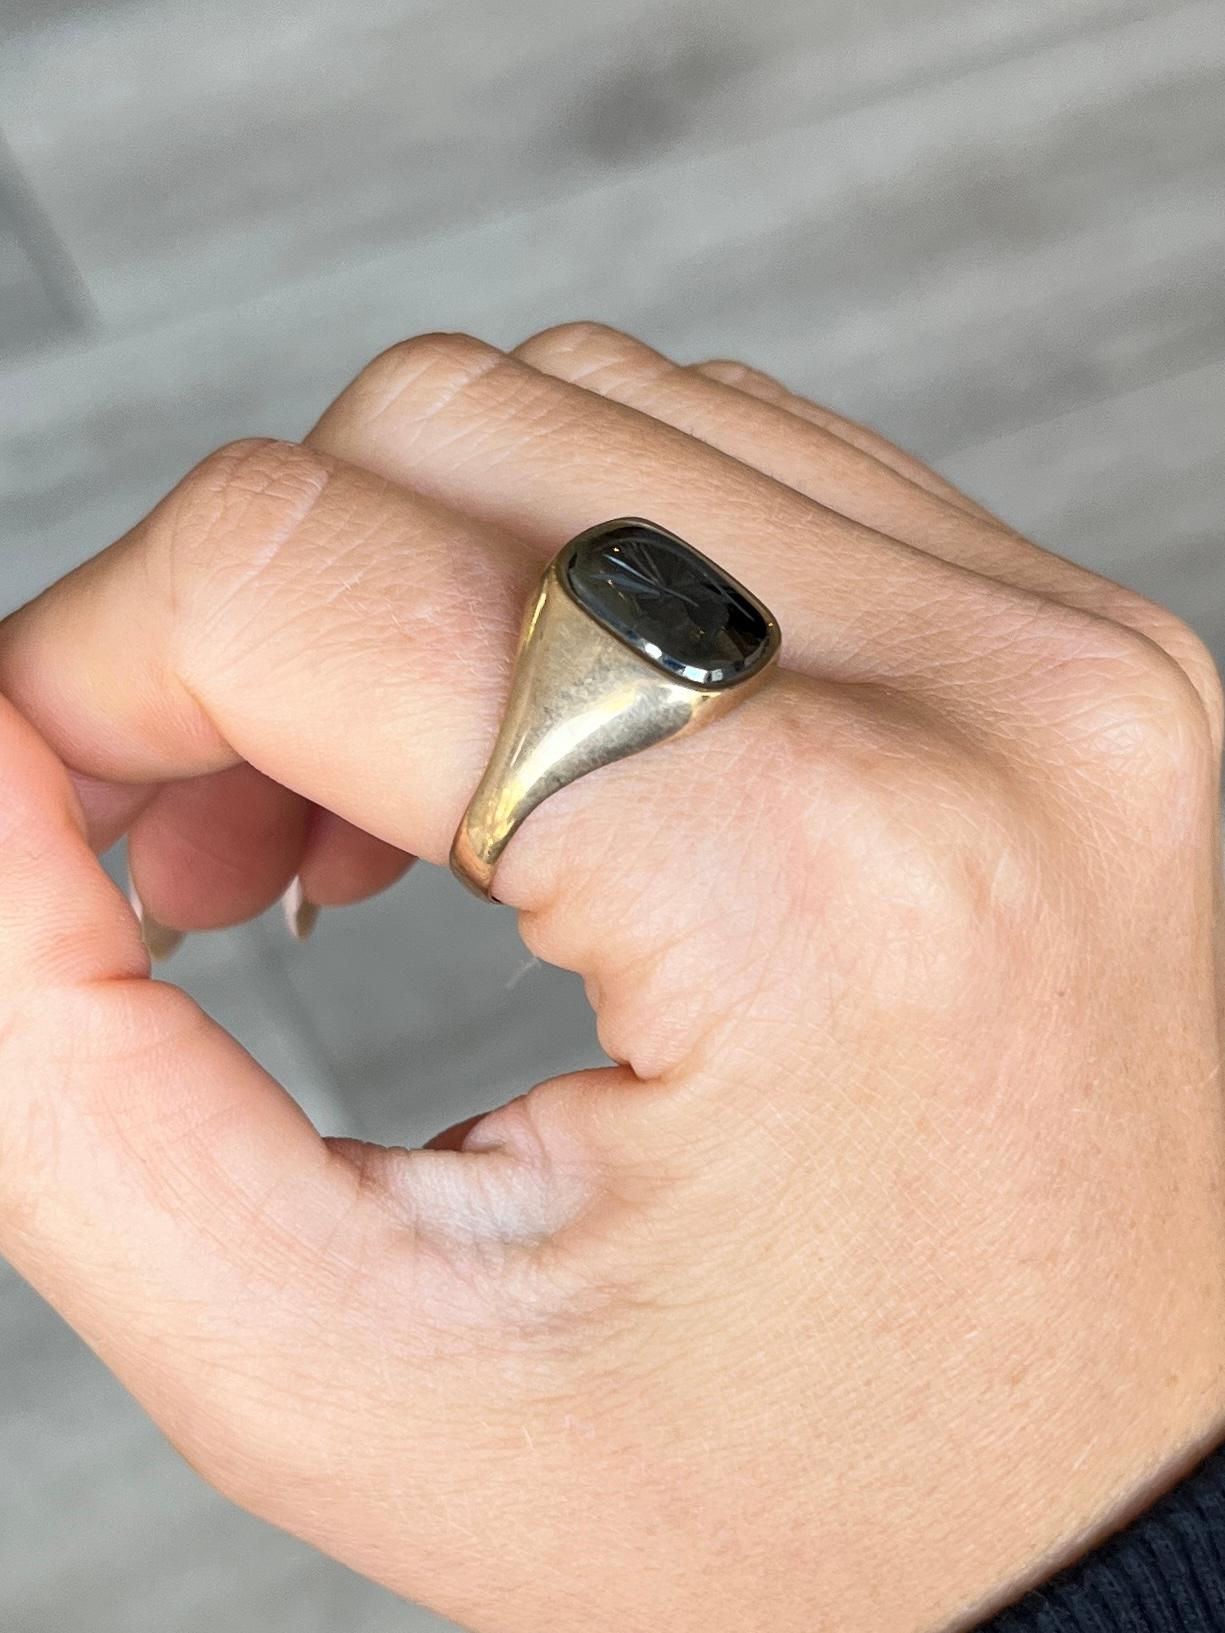 This glossy and shiny Hematite signet ring has a beautifully engraved soldier on the face. Made in Birmingham, England 1977.

Ring Size: W 1/4 or 11 1/4 
Stone Face dimensions: 10x12mm

Weight: 4g
